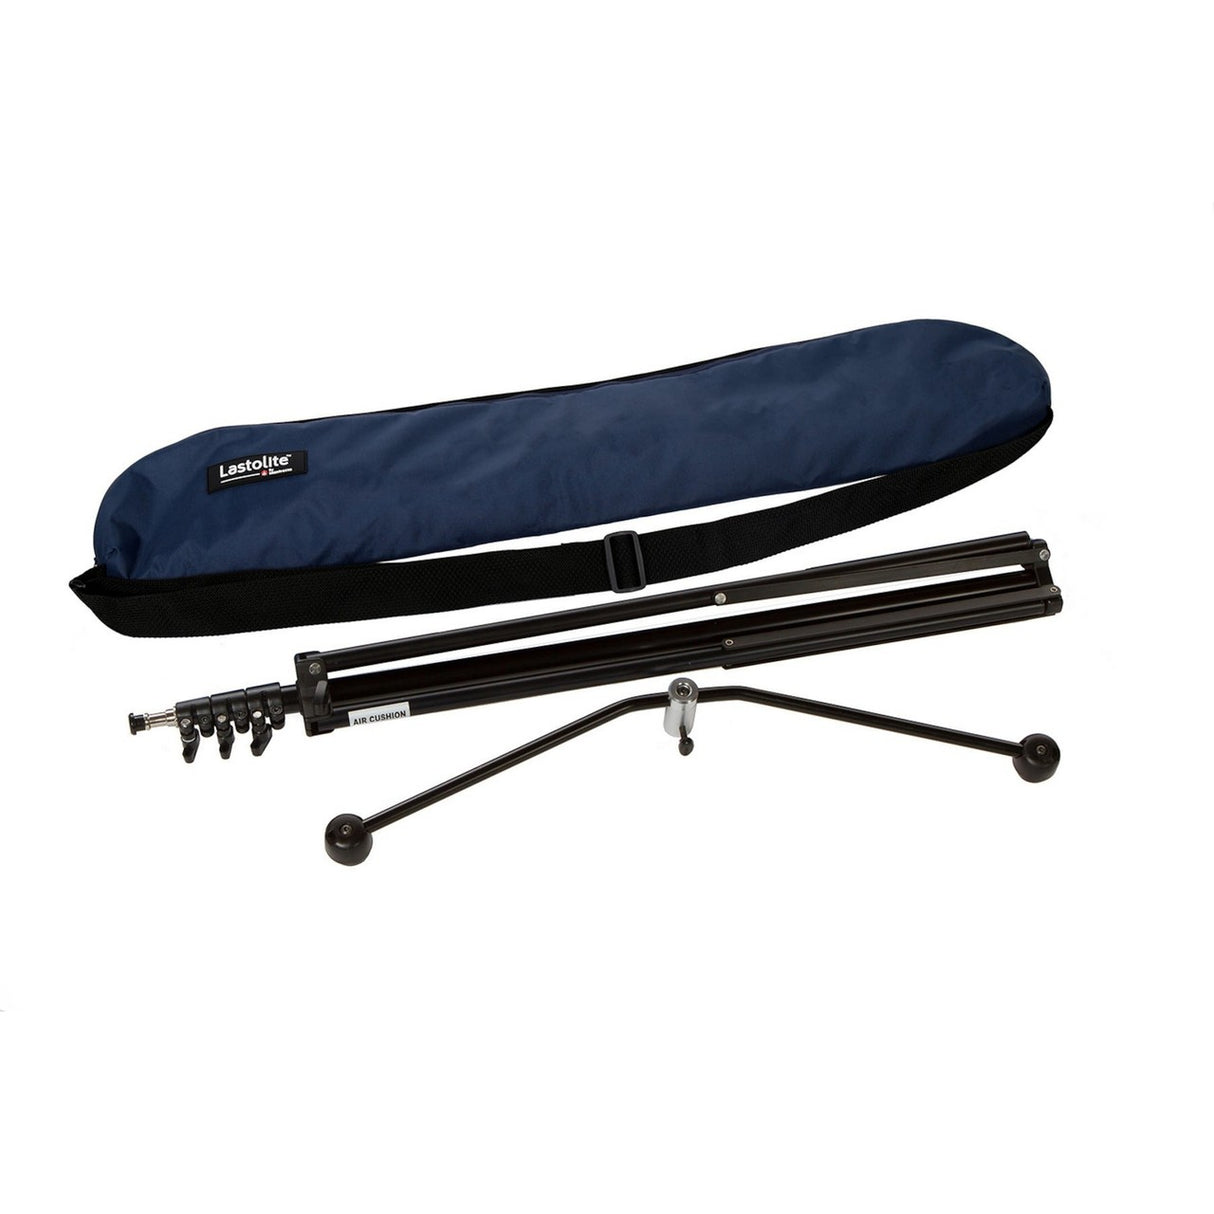 Lastolite LB1121 Magnetic Background Support Kit with Lighting Stand, Carry Case (Used)